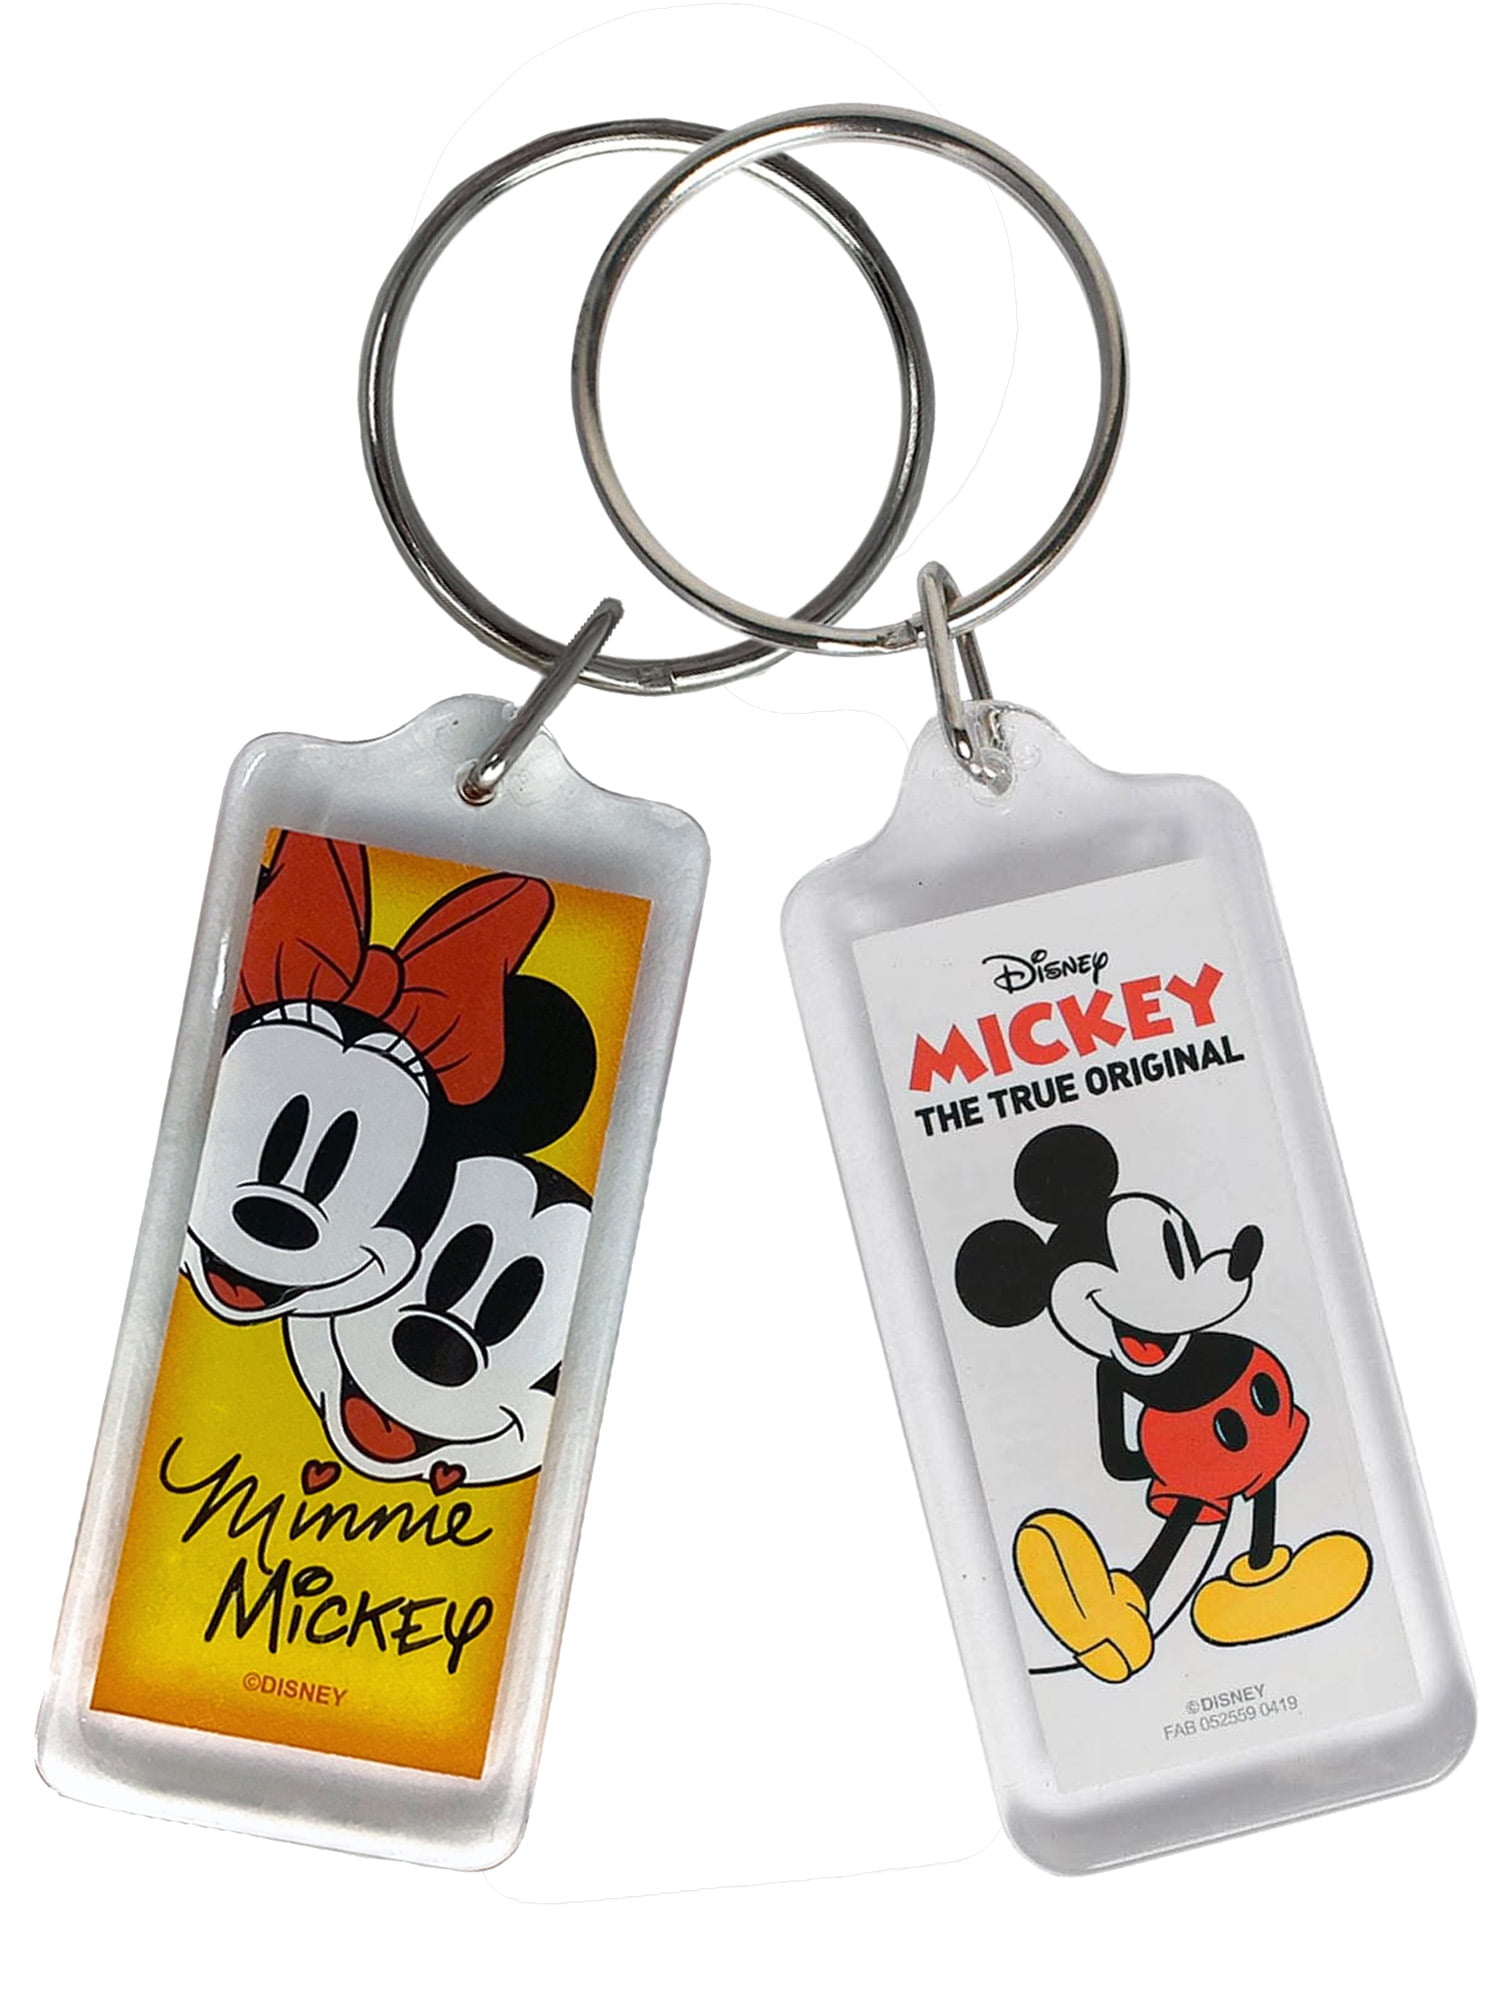 Disney Mickey Mouse Hand Up Figural PVC Keychain Keyring Key Ring Chain 